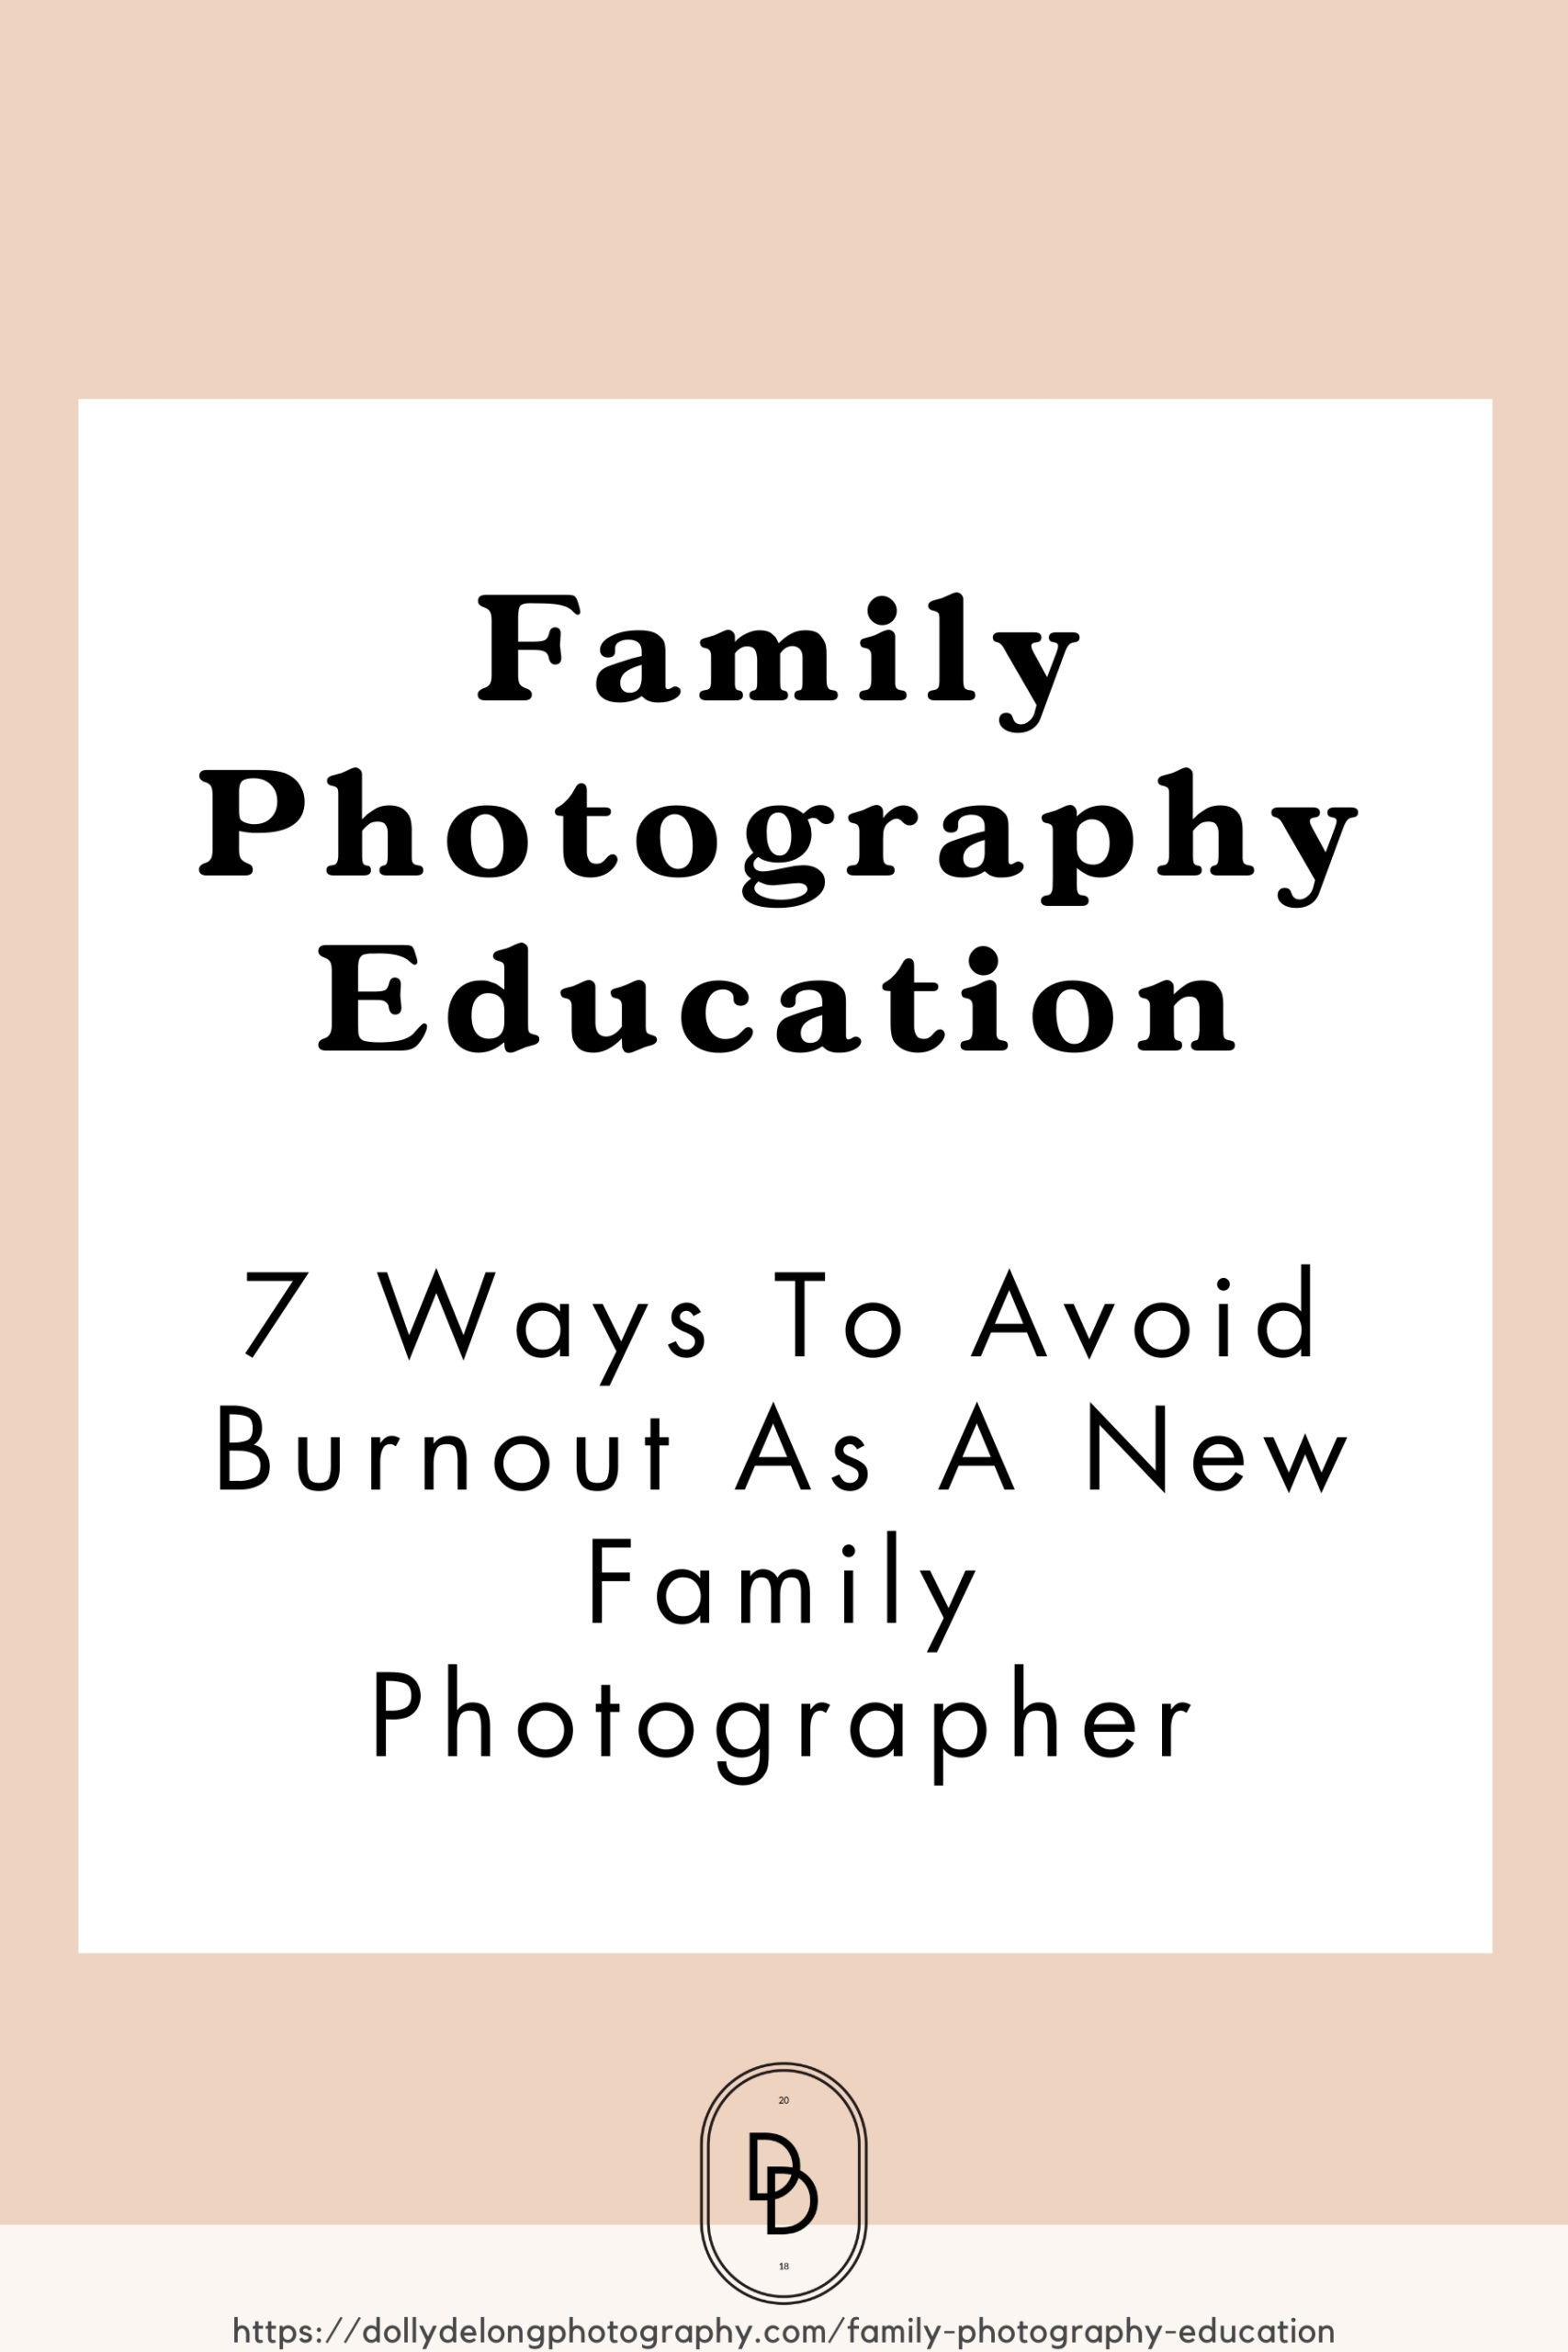 7 ways to avoid burnout as a family photographer by nashville family photographer and educator dolly delong photography